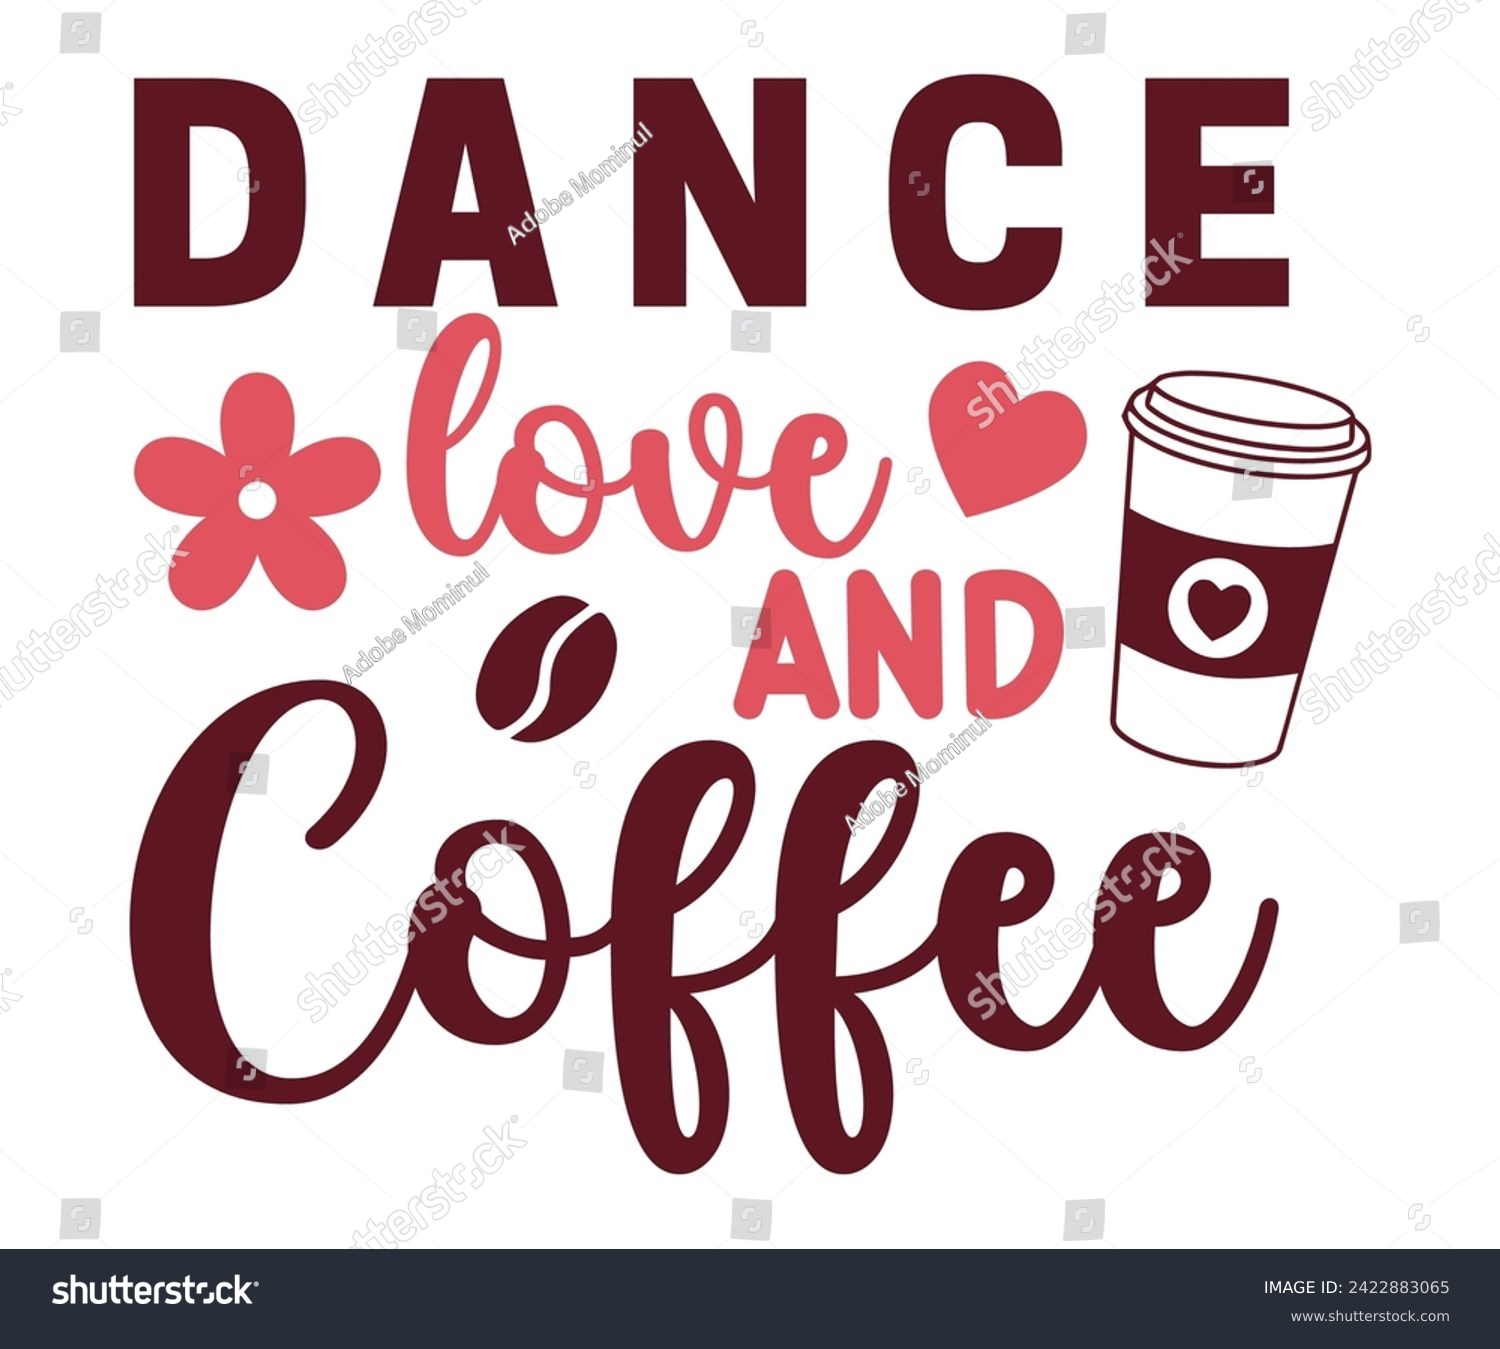 SVG of Dance Love And Coffee,Coffee Svg,Coffee Retro,Funny Coffee Sayings,Coffee Mug Svg,Coffee Cup Svg,Gift For Coffee,Coffee Lover,Caffeine Svg,Svg Cut File,Coffee Quotes,Sublimation Design, svg